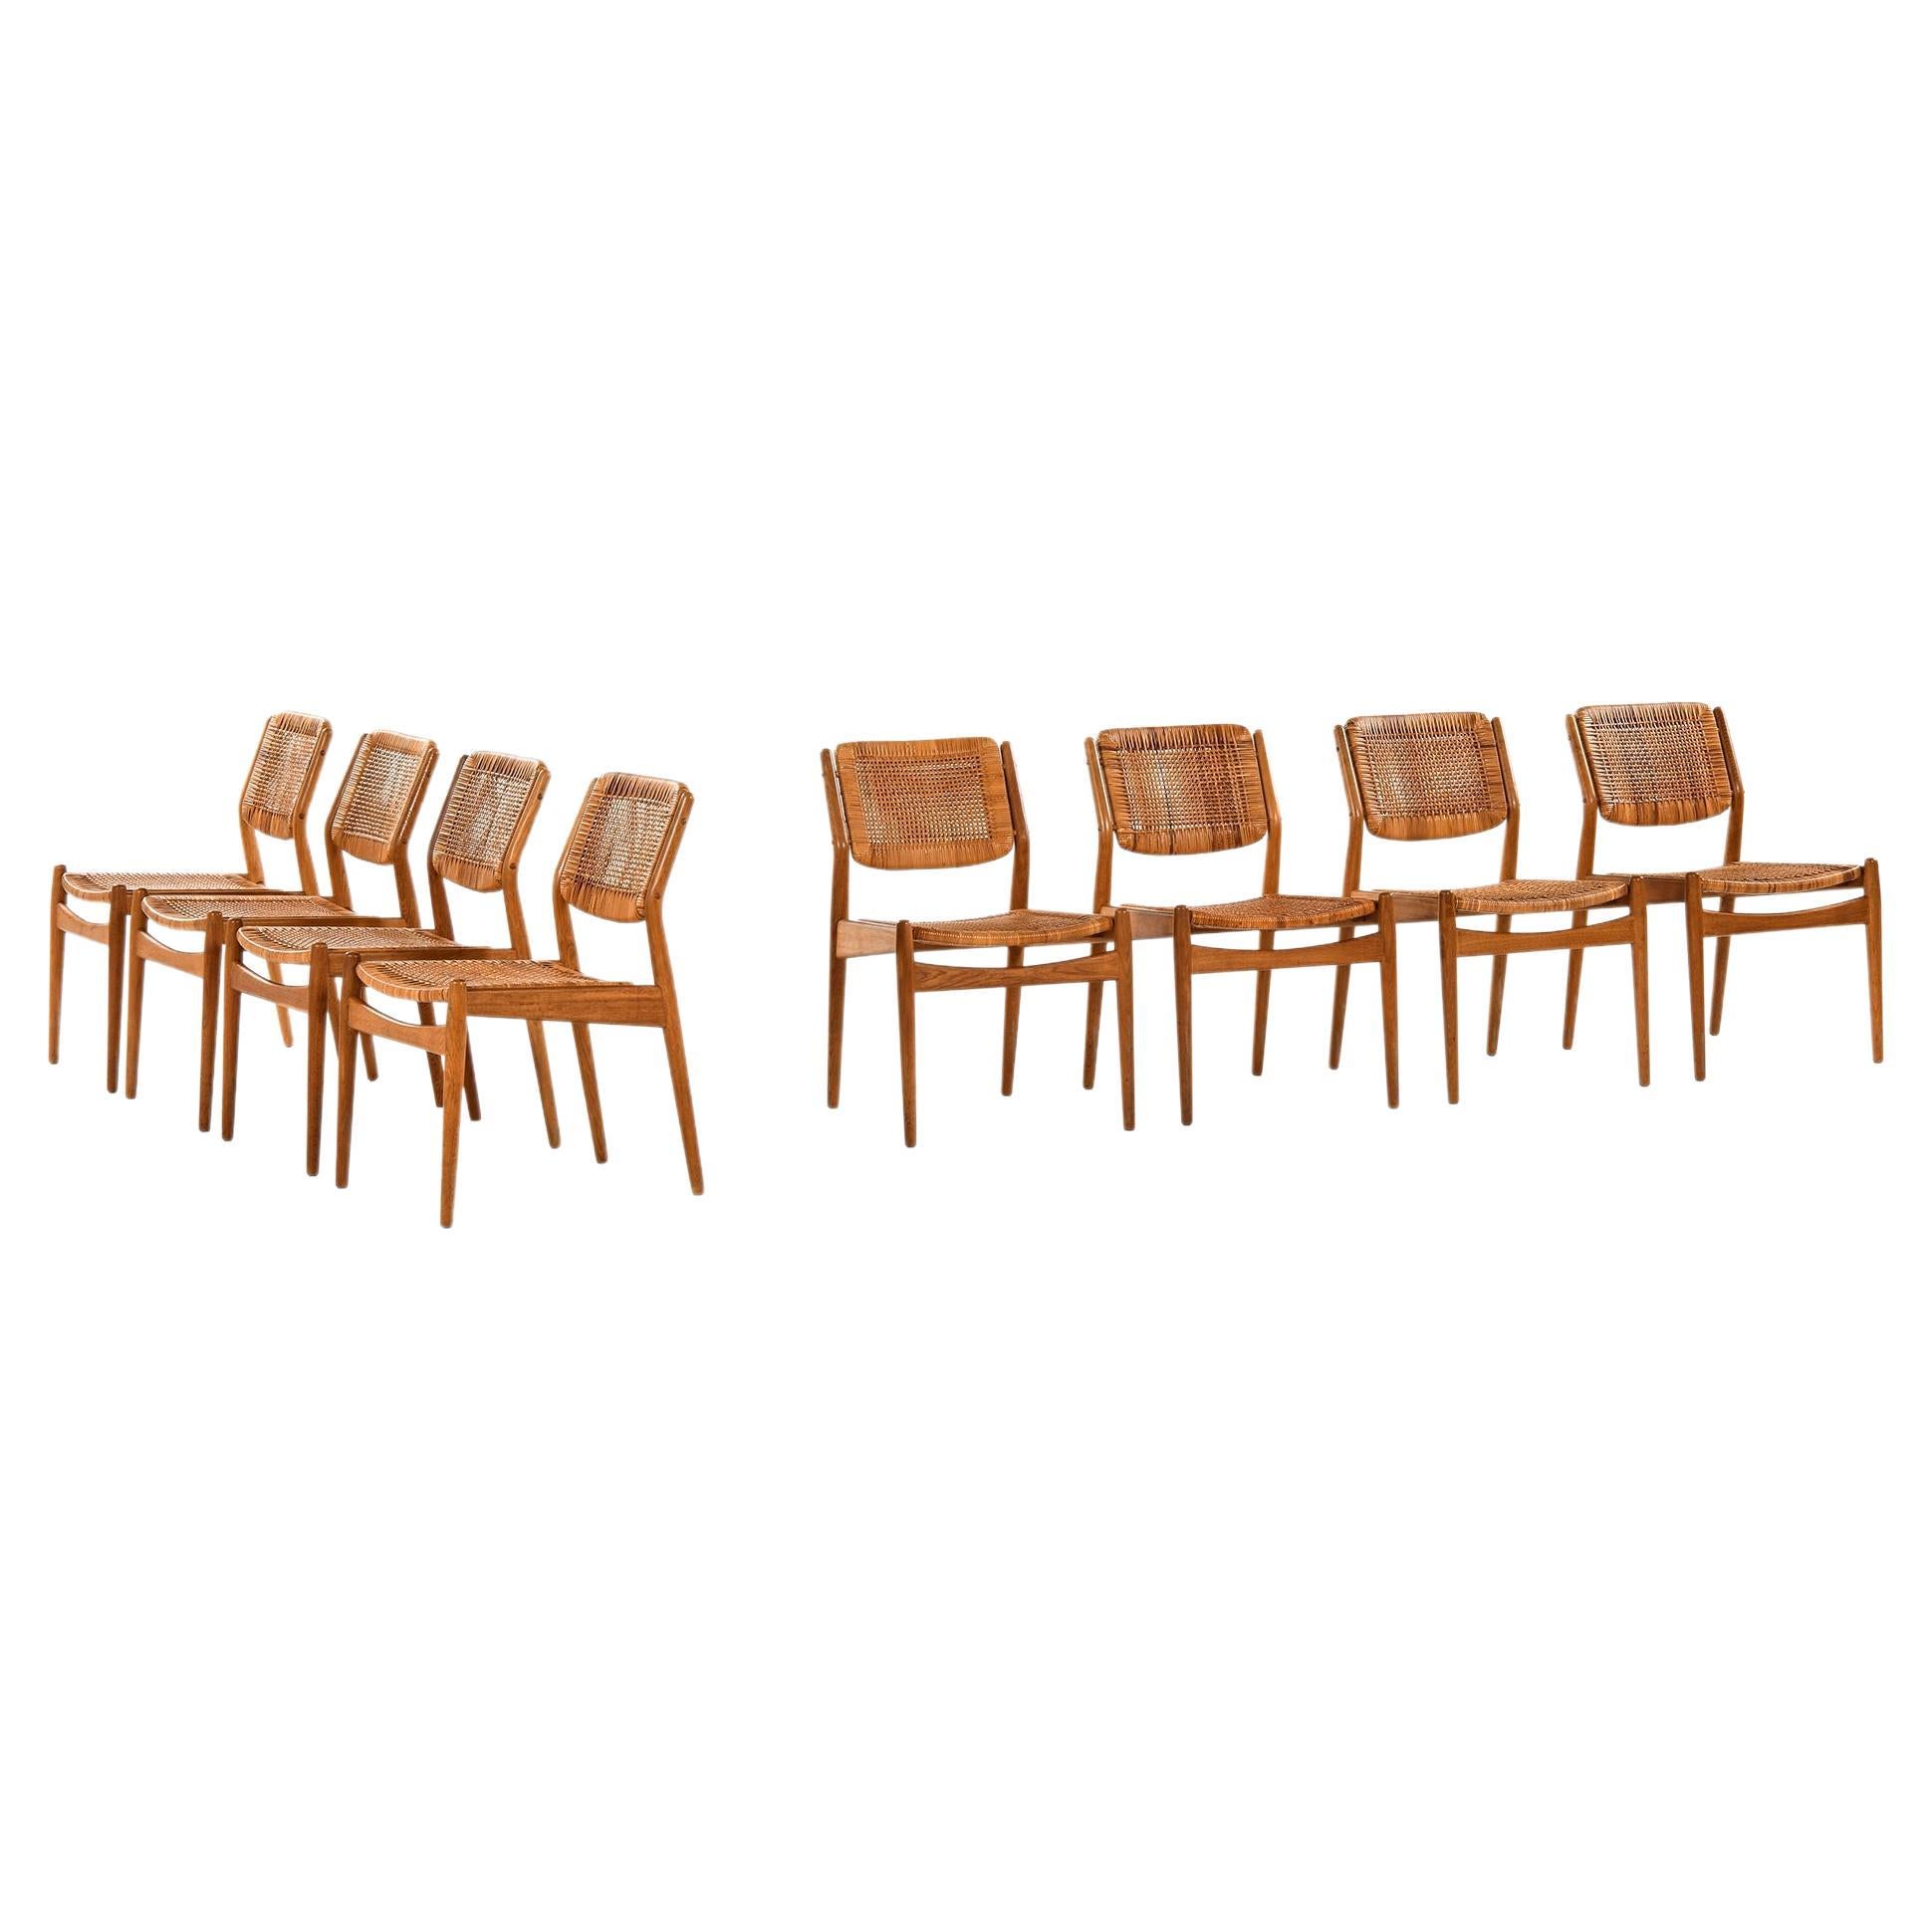 Set of 8 Dining Chairs in Oak and Woven Cane by Arne Vodder, 1951 For Sale